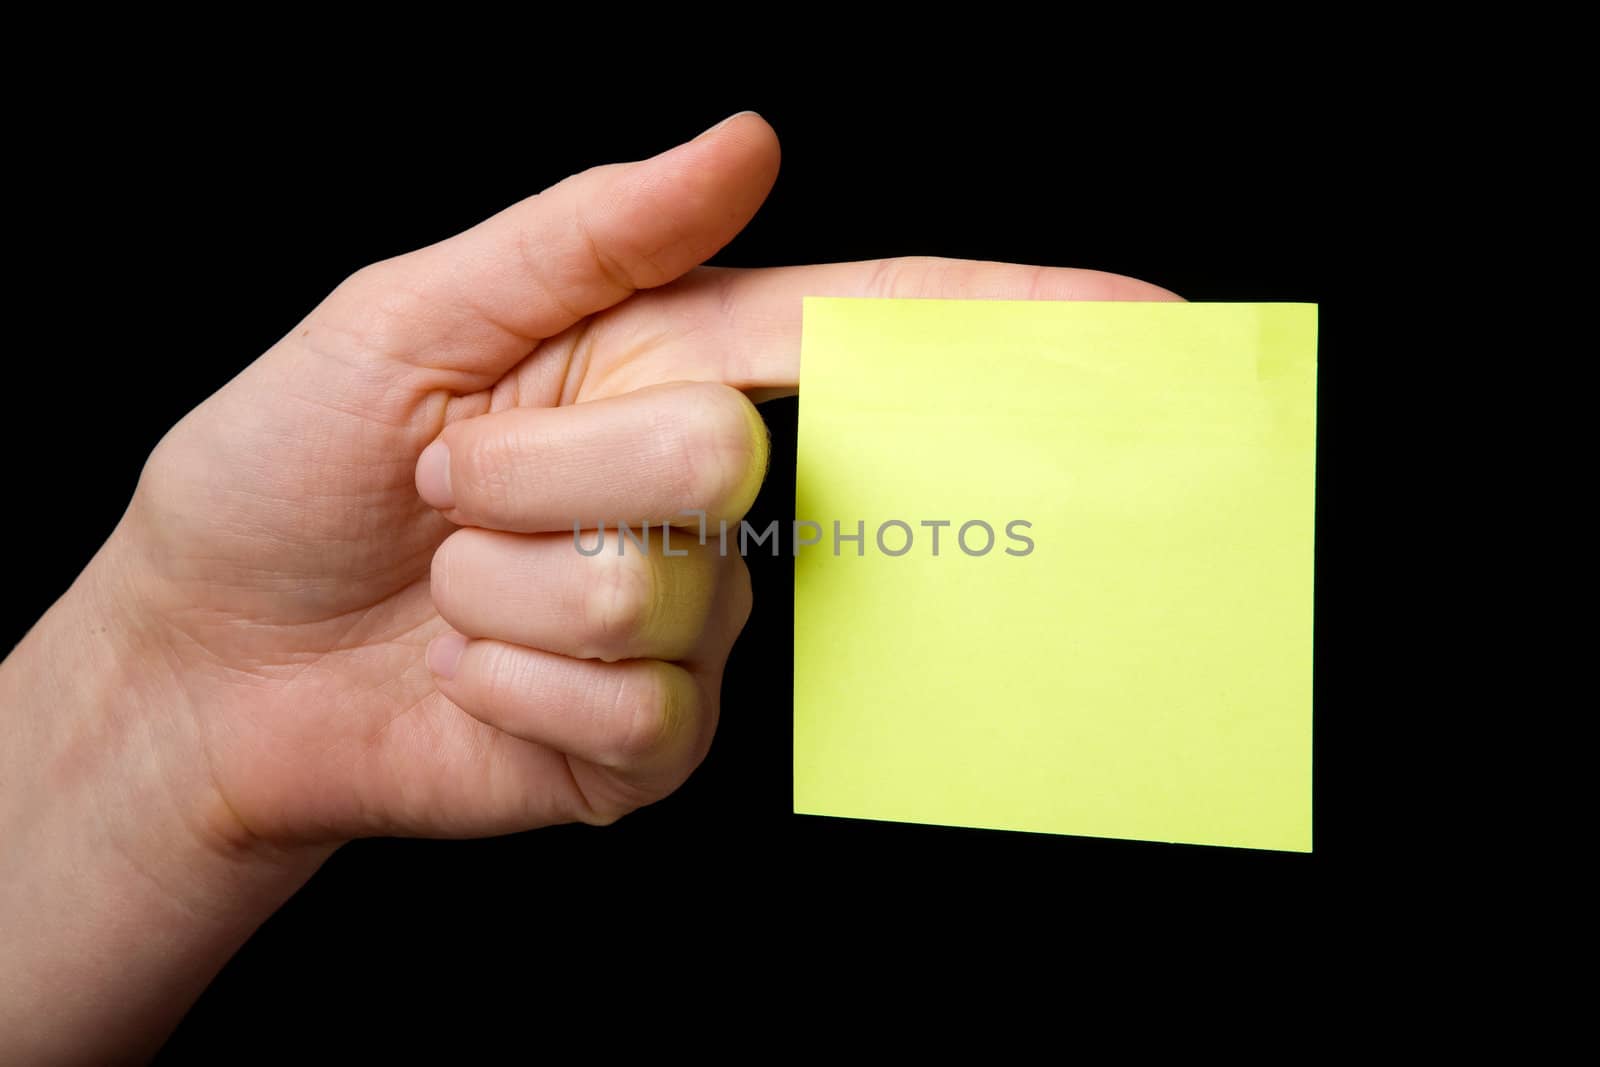 A blank sticky note stuck to a hand - remember this